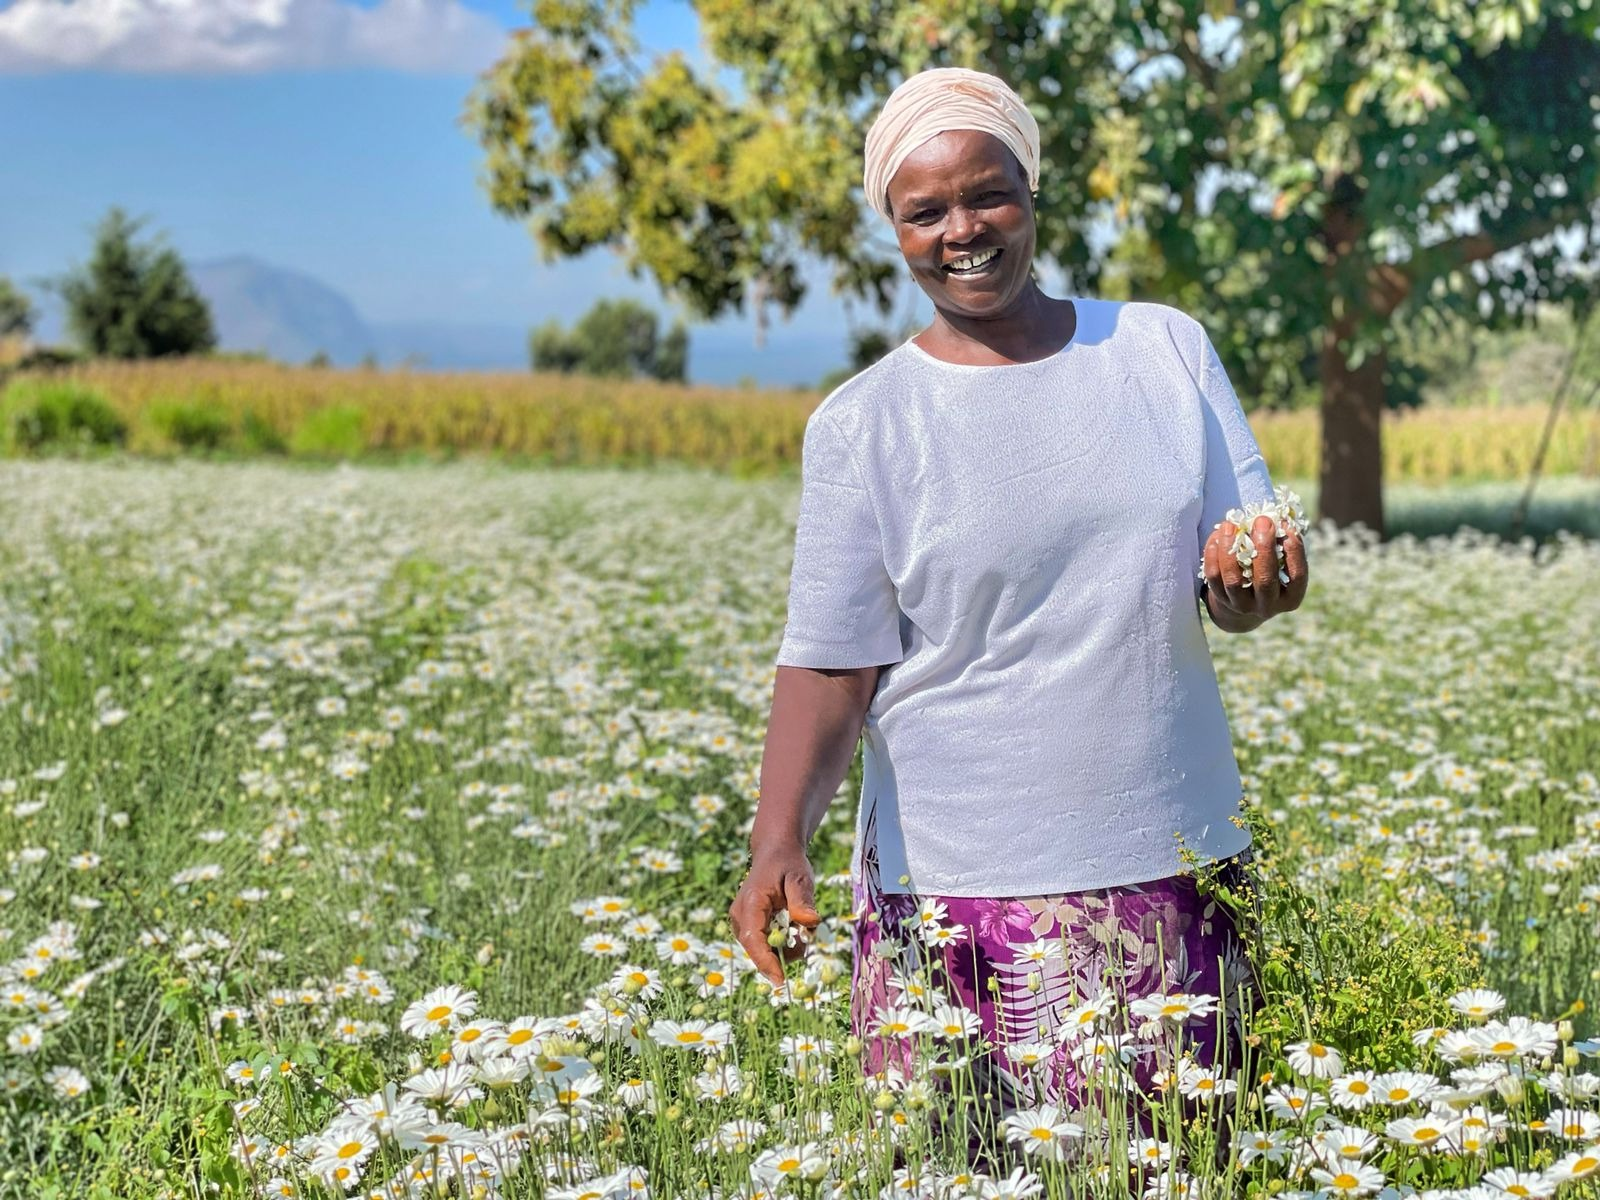 A smiling person standing in a flower field